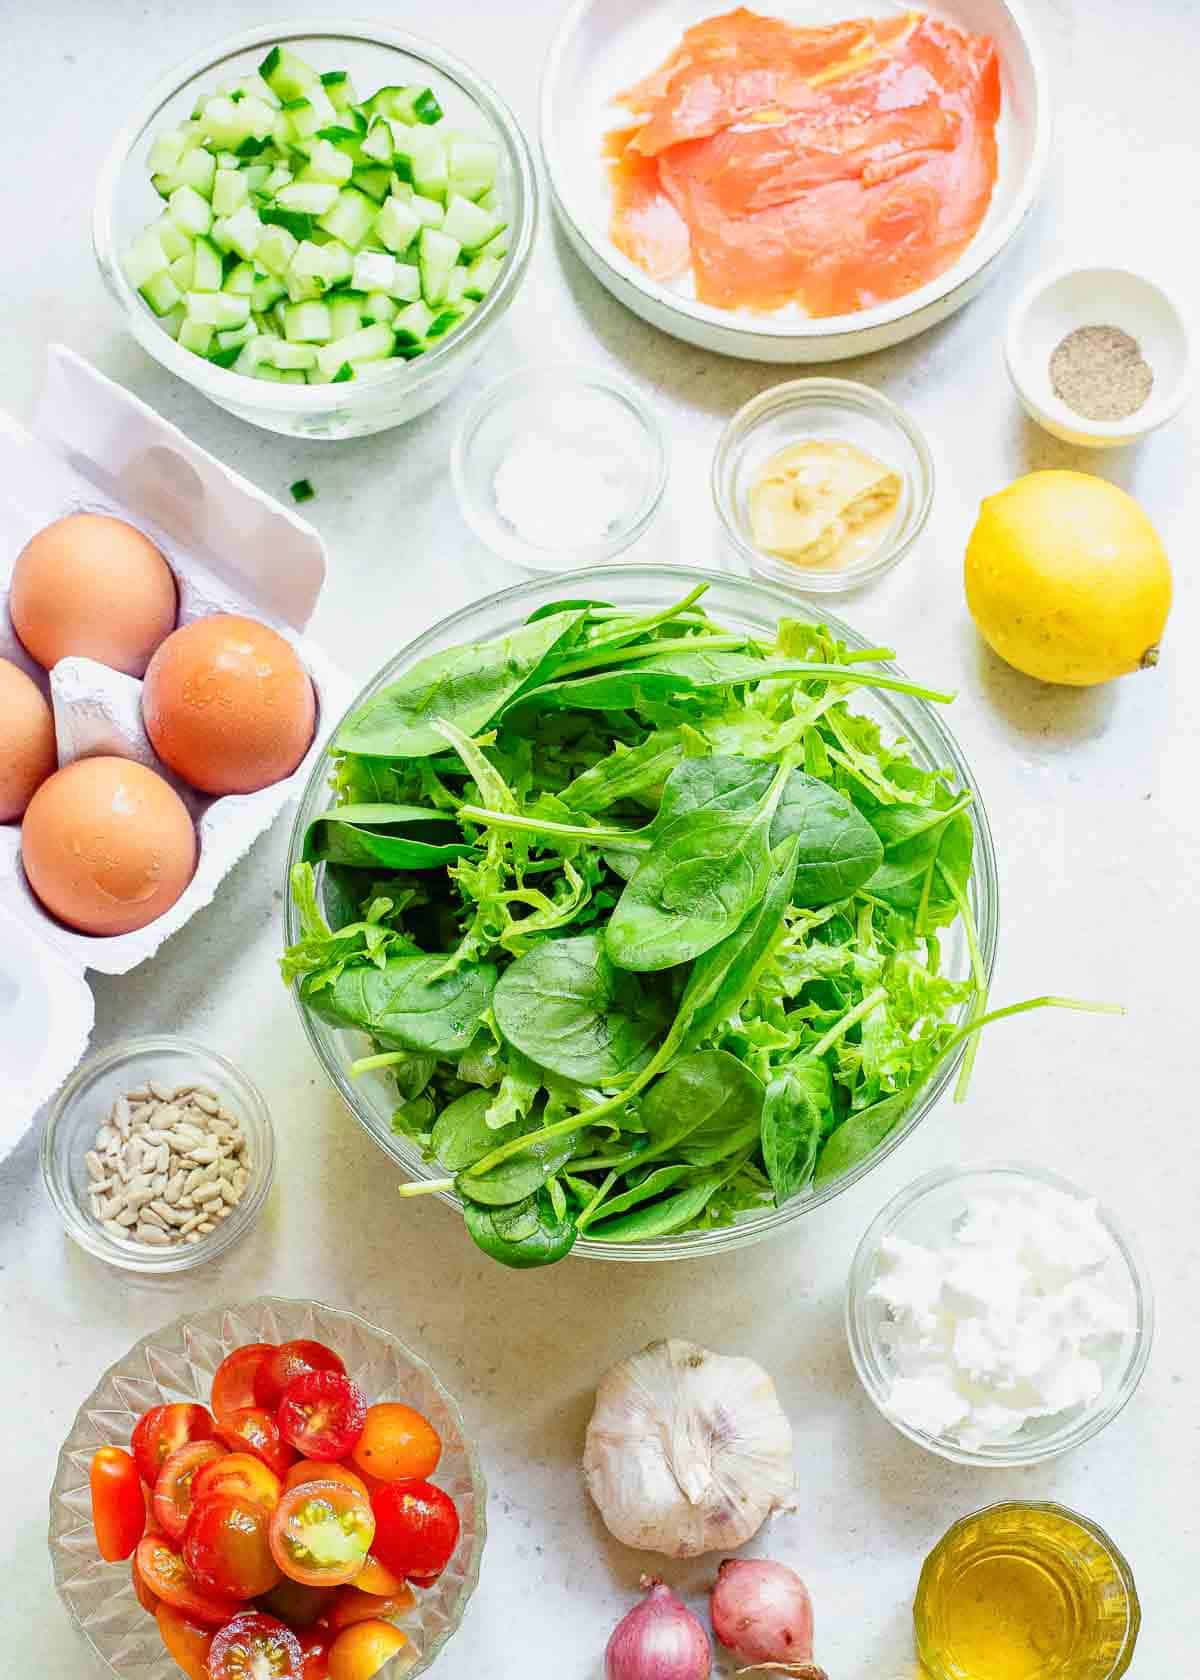 Various fresh ingredients on a table, including salmon, eggs, arugula, cucumbers, tomatoes, garlic, and lemon, arranged for meal preparation.